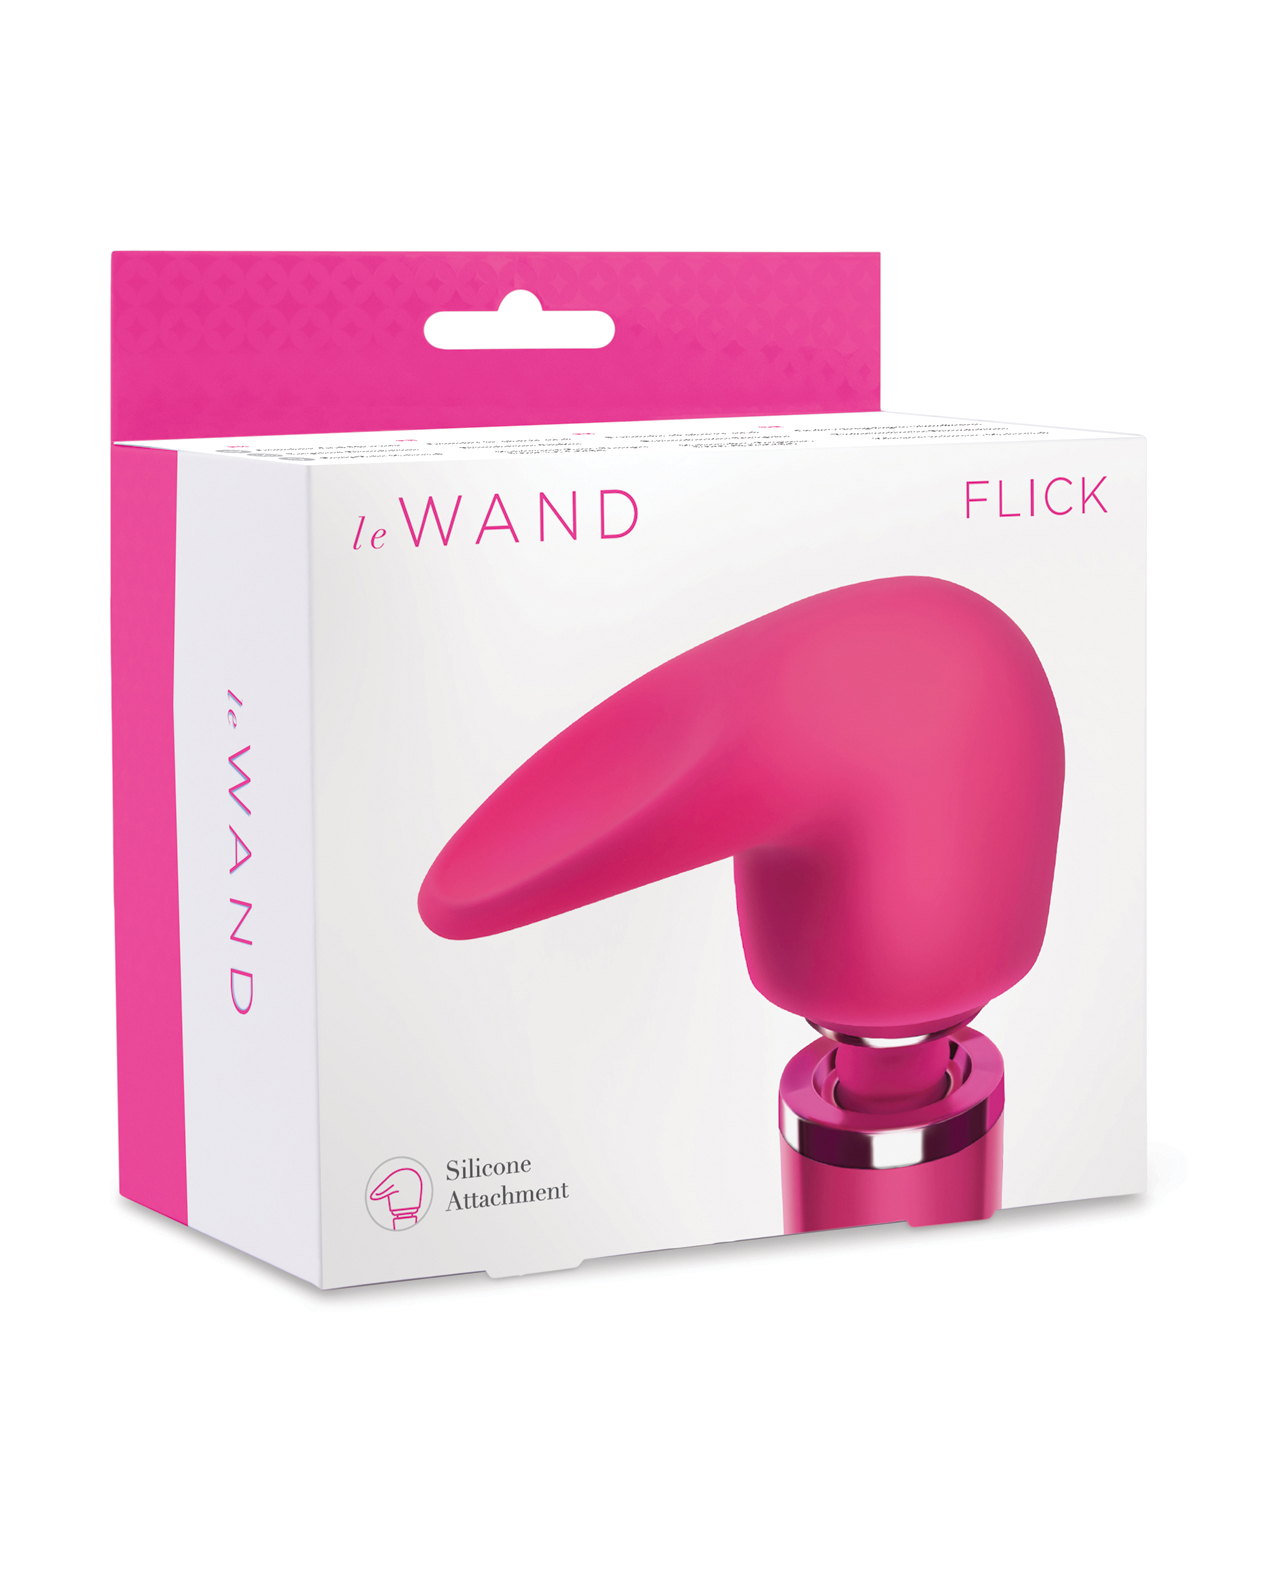 Pink flexible silicone attachment for Le Wand massager